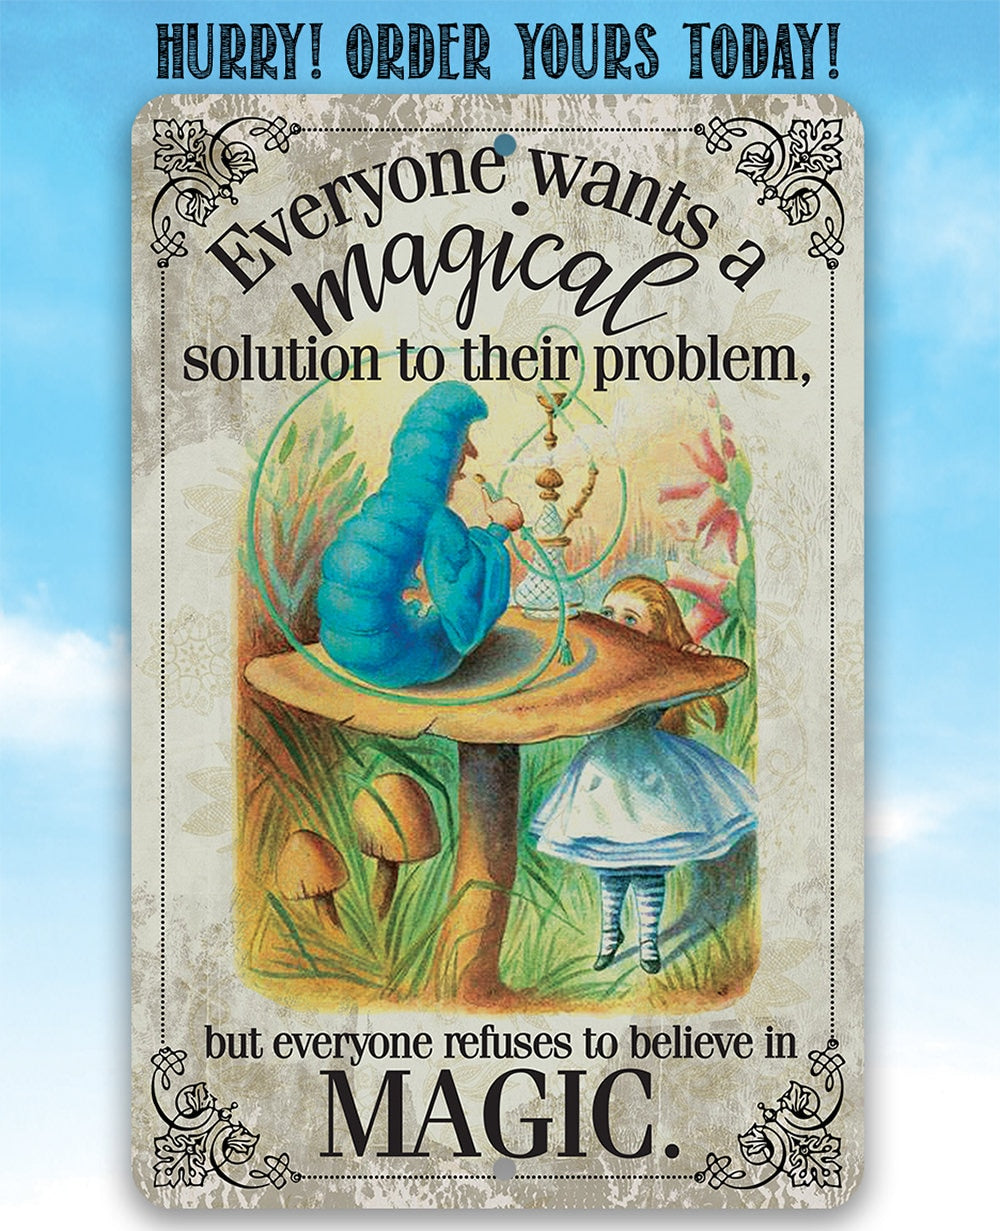 Wants A Magical Solution To Their Problem, Refuses To Believe In Magic - Metal Sign Metal Sign Lone Star Art 